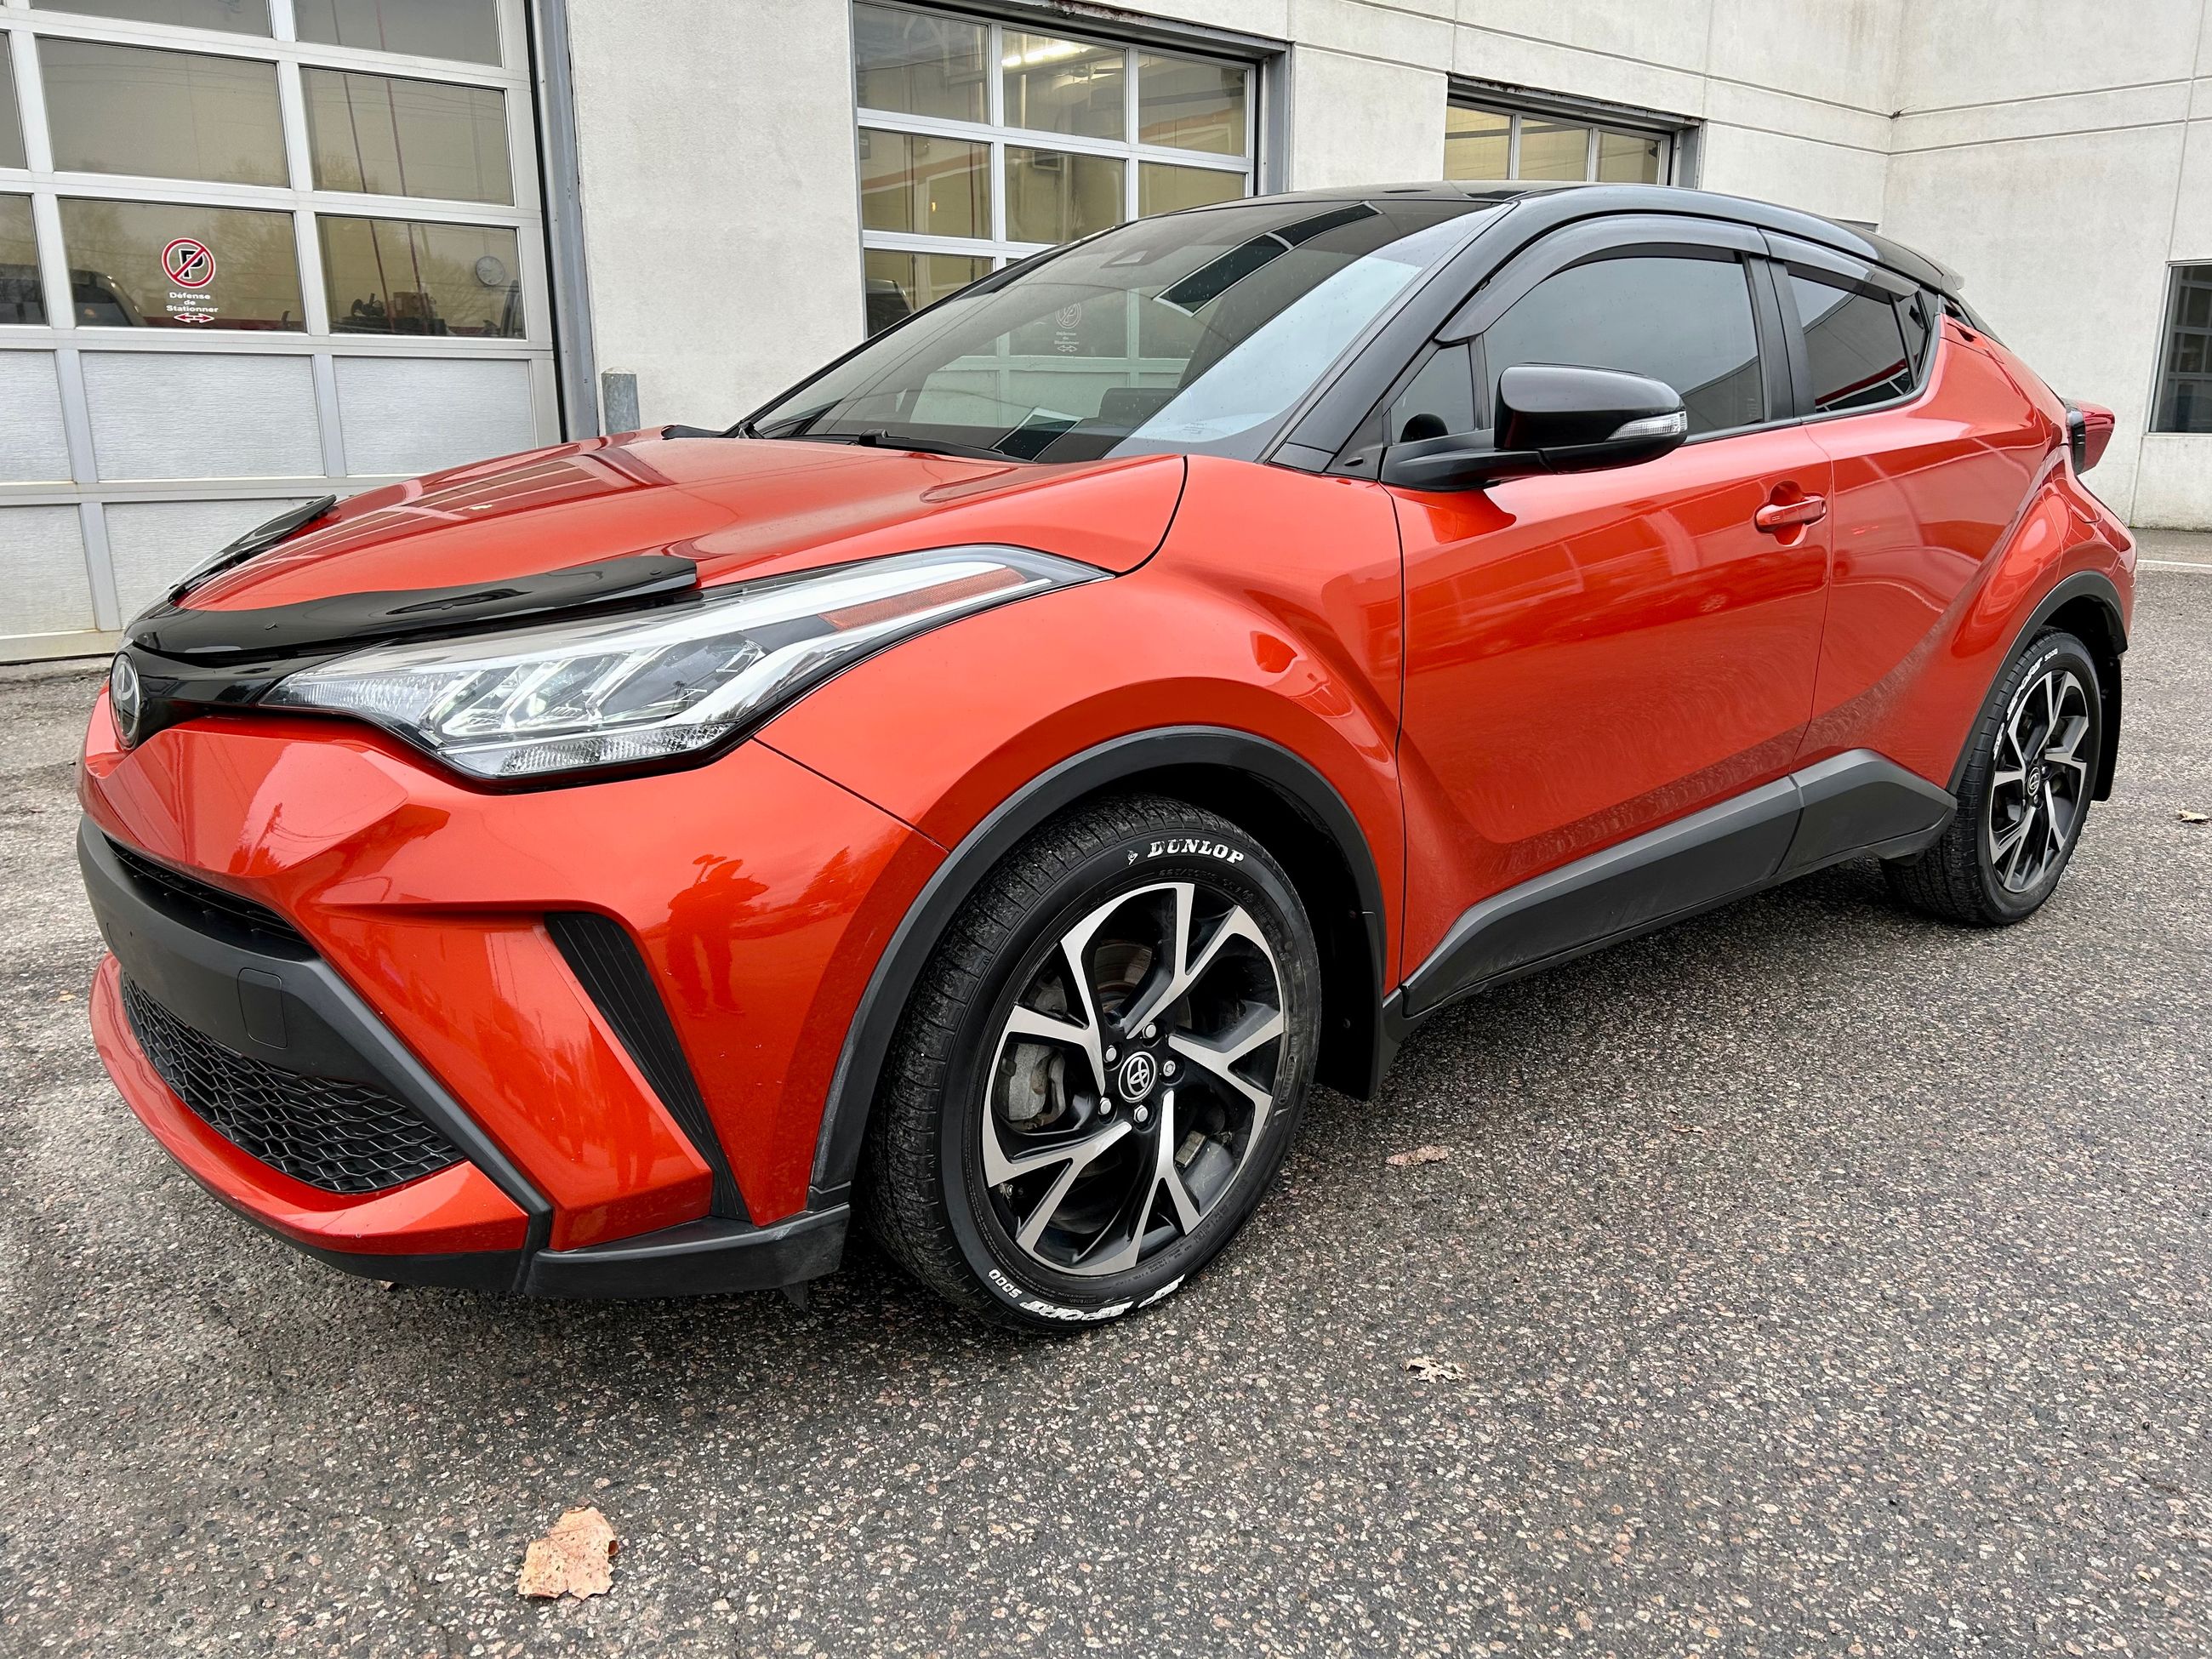 https://img.sm360.ca/images/inventory/toyota-mont-laurier/toyota/c-hr/2021/31762084/31762084_05044_2021-toyota-c-hr_001.jpg